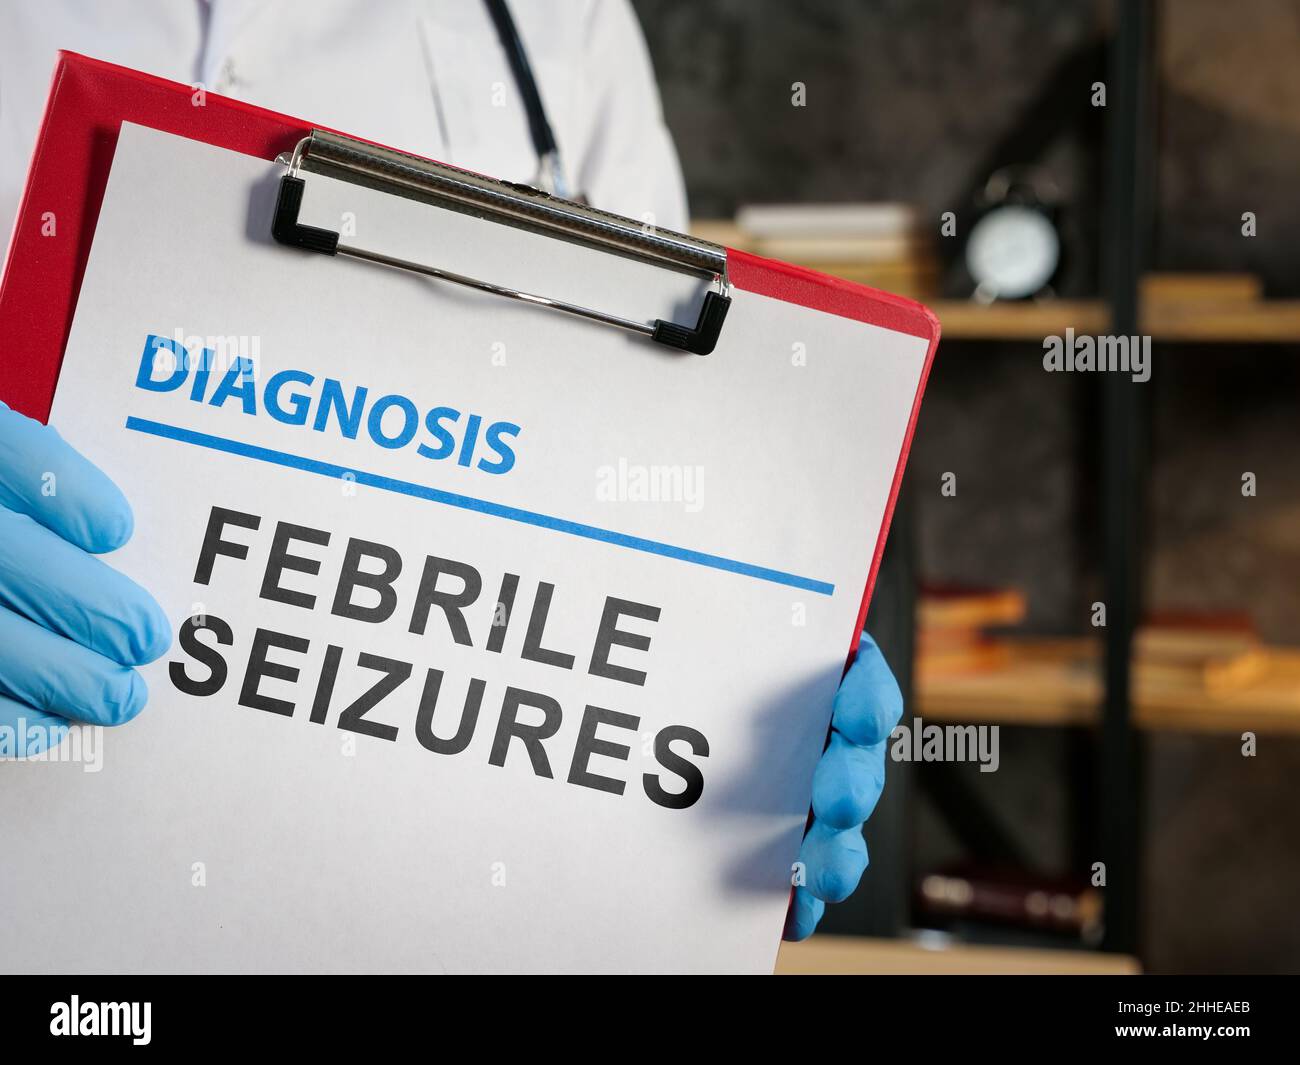 Doctor shows diagnosis febrile seizures on the medic form. Stock Photo